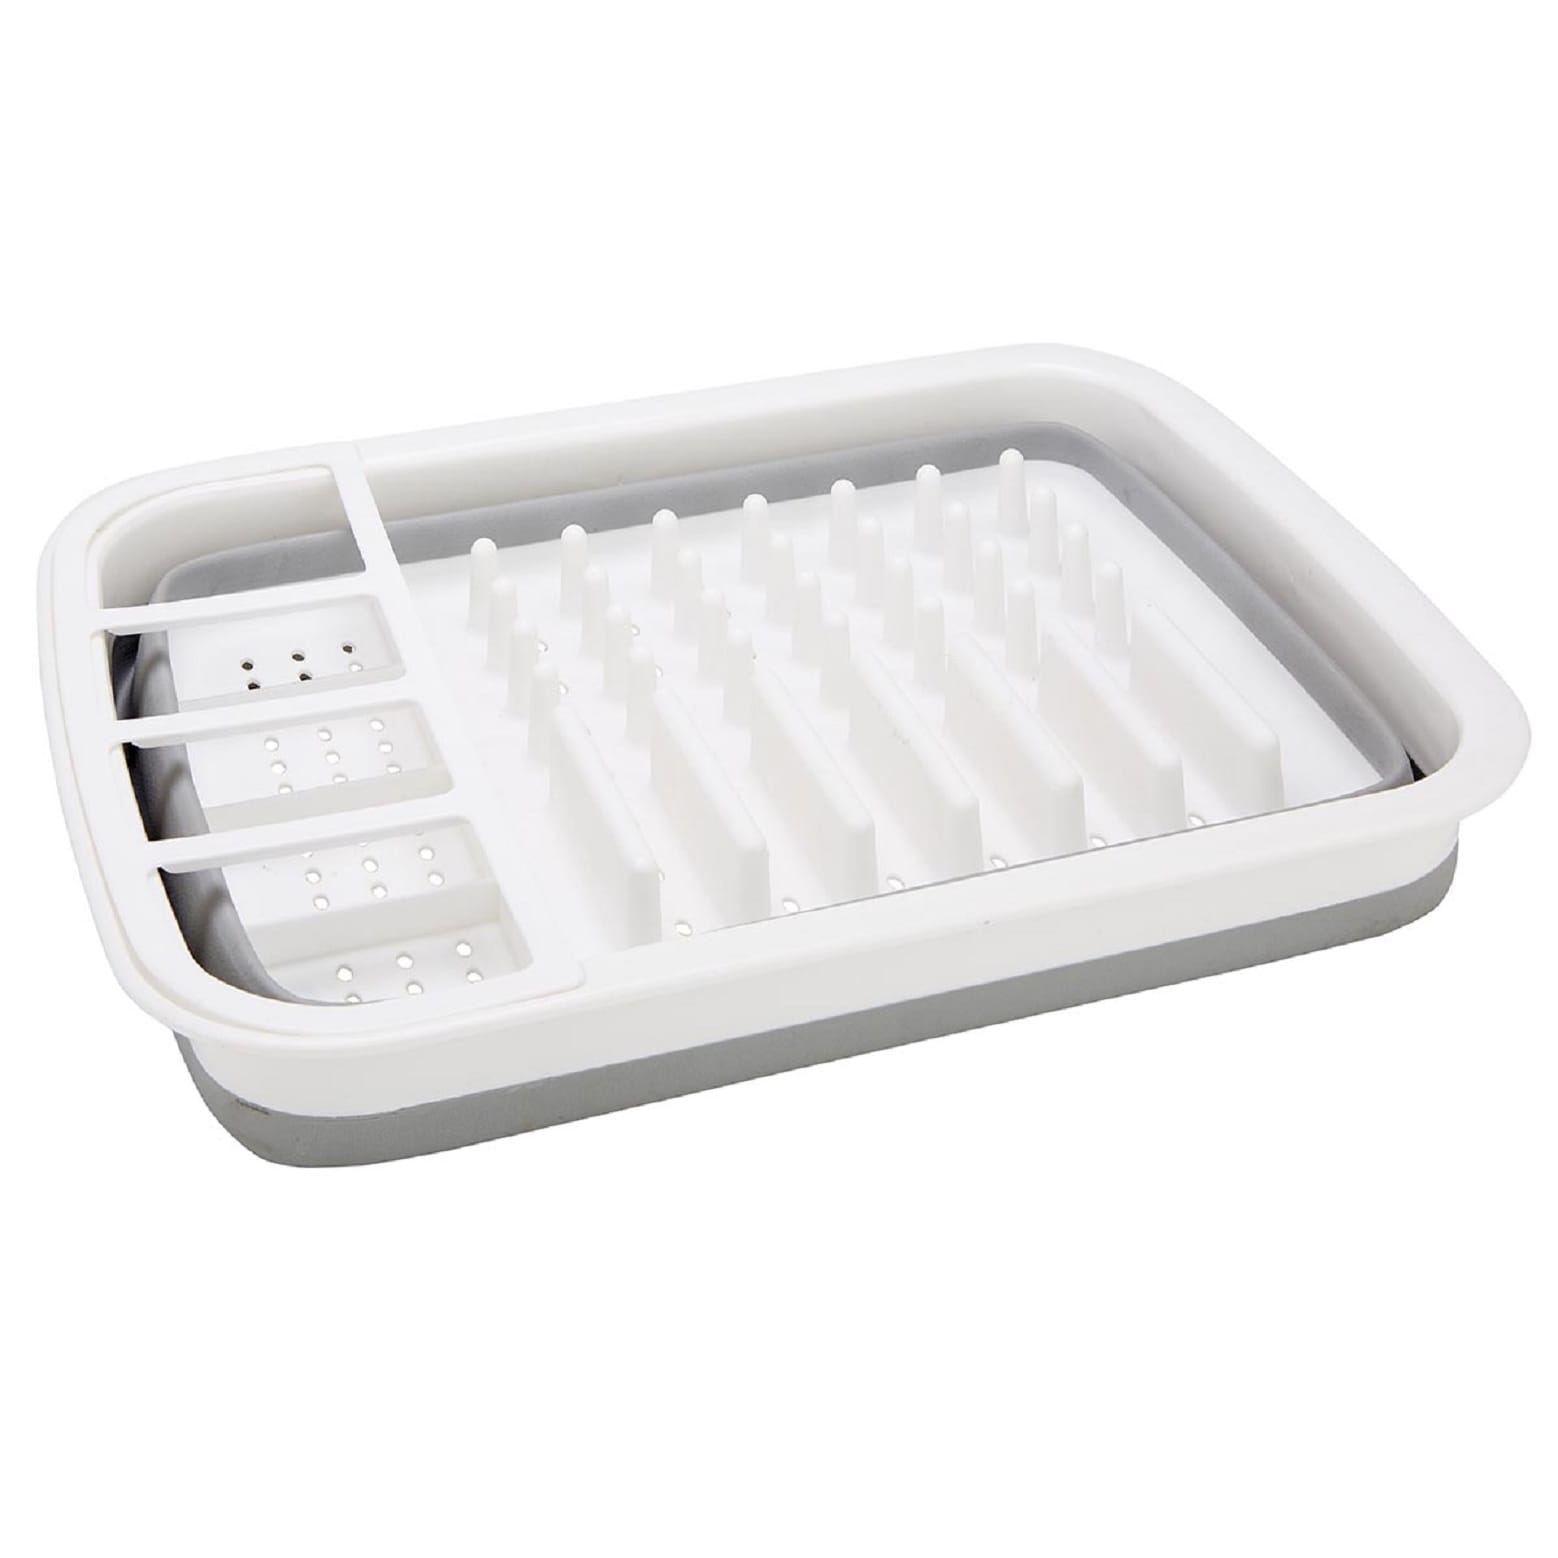 https://ak1.ostkcdn.com/images/products/12074460/Kennedy-White-Plastic-Collapsible-Dish-Rack-with-Cutlery-Holder-6db235fe-d94e-4cd3-bb13-906eaaae330d.jpg